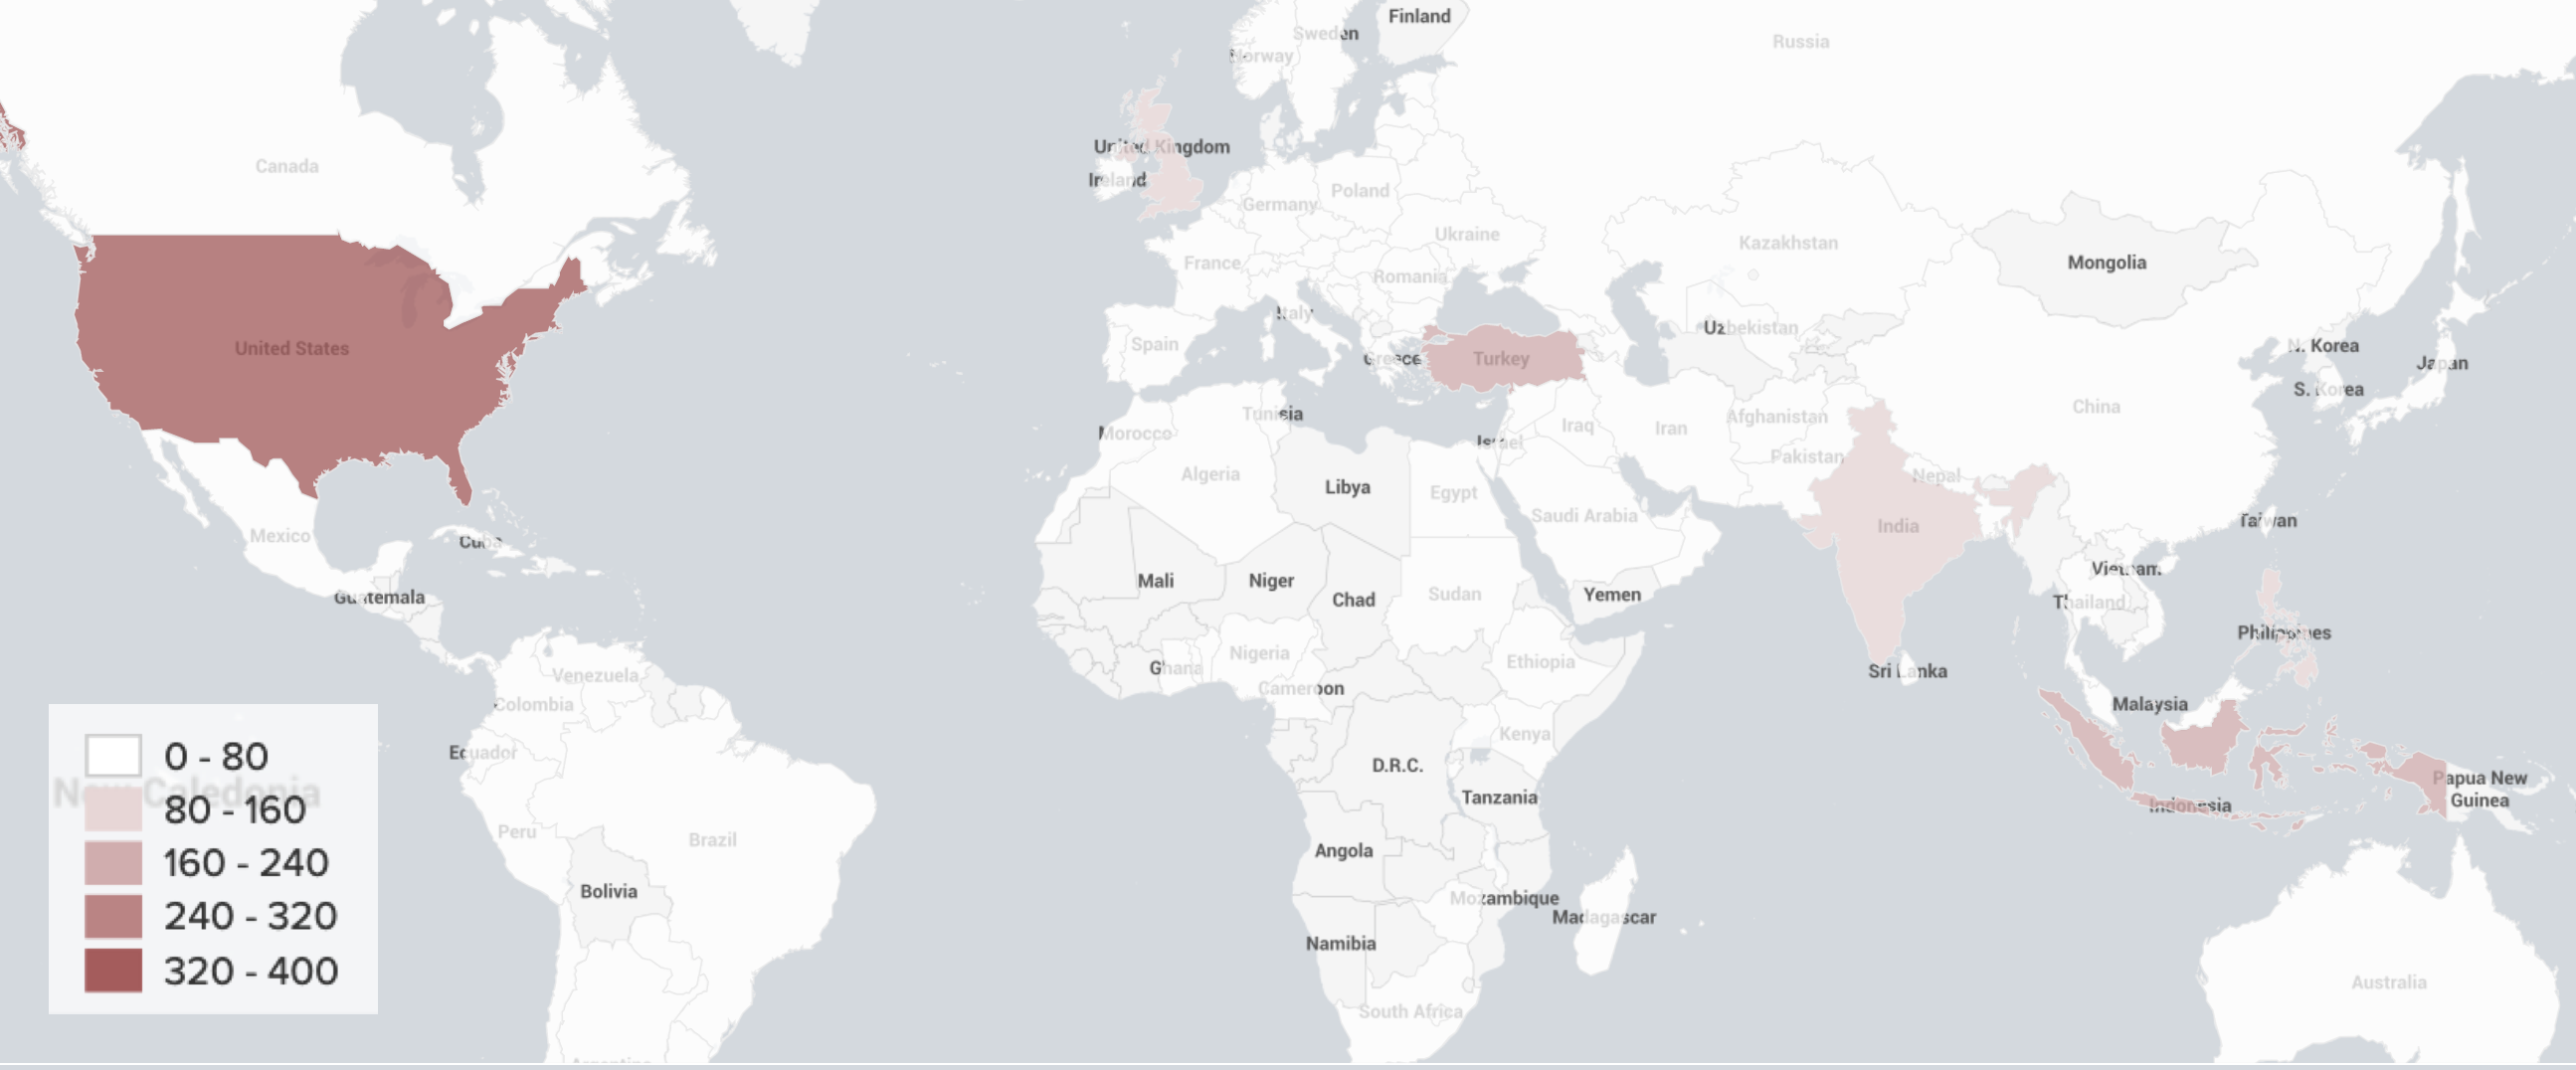 Derivatives trader map: countries, 2,164 unique users (NER, Language Identification, and Twitter API combined)